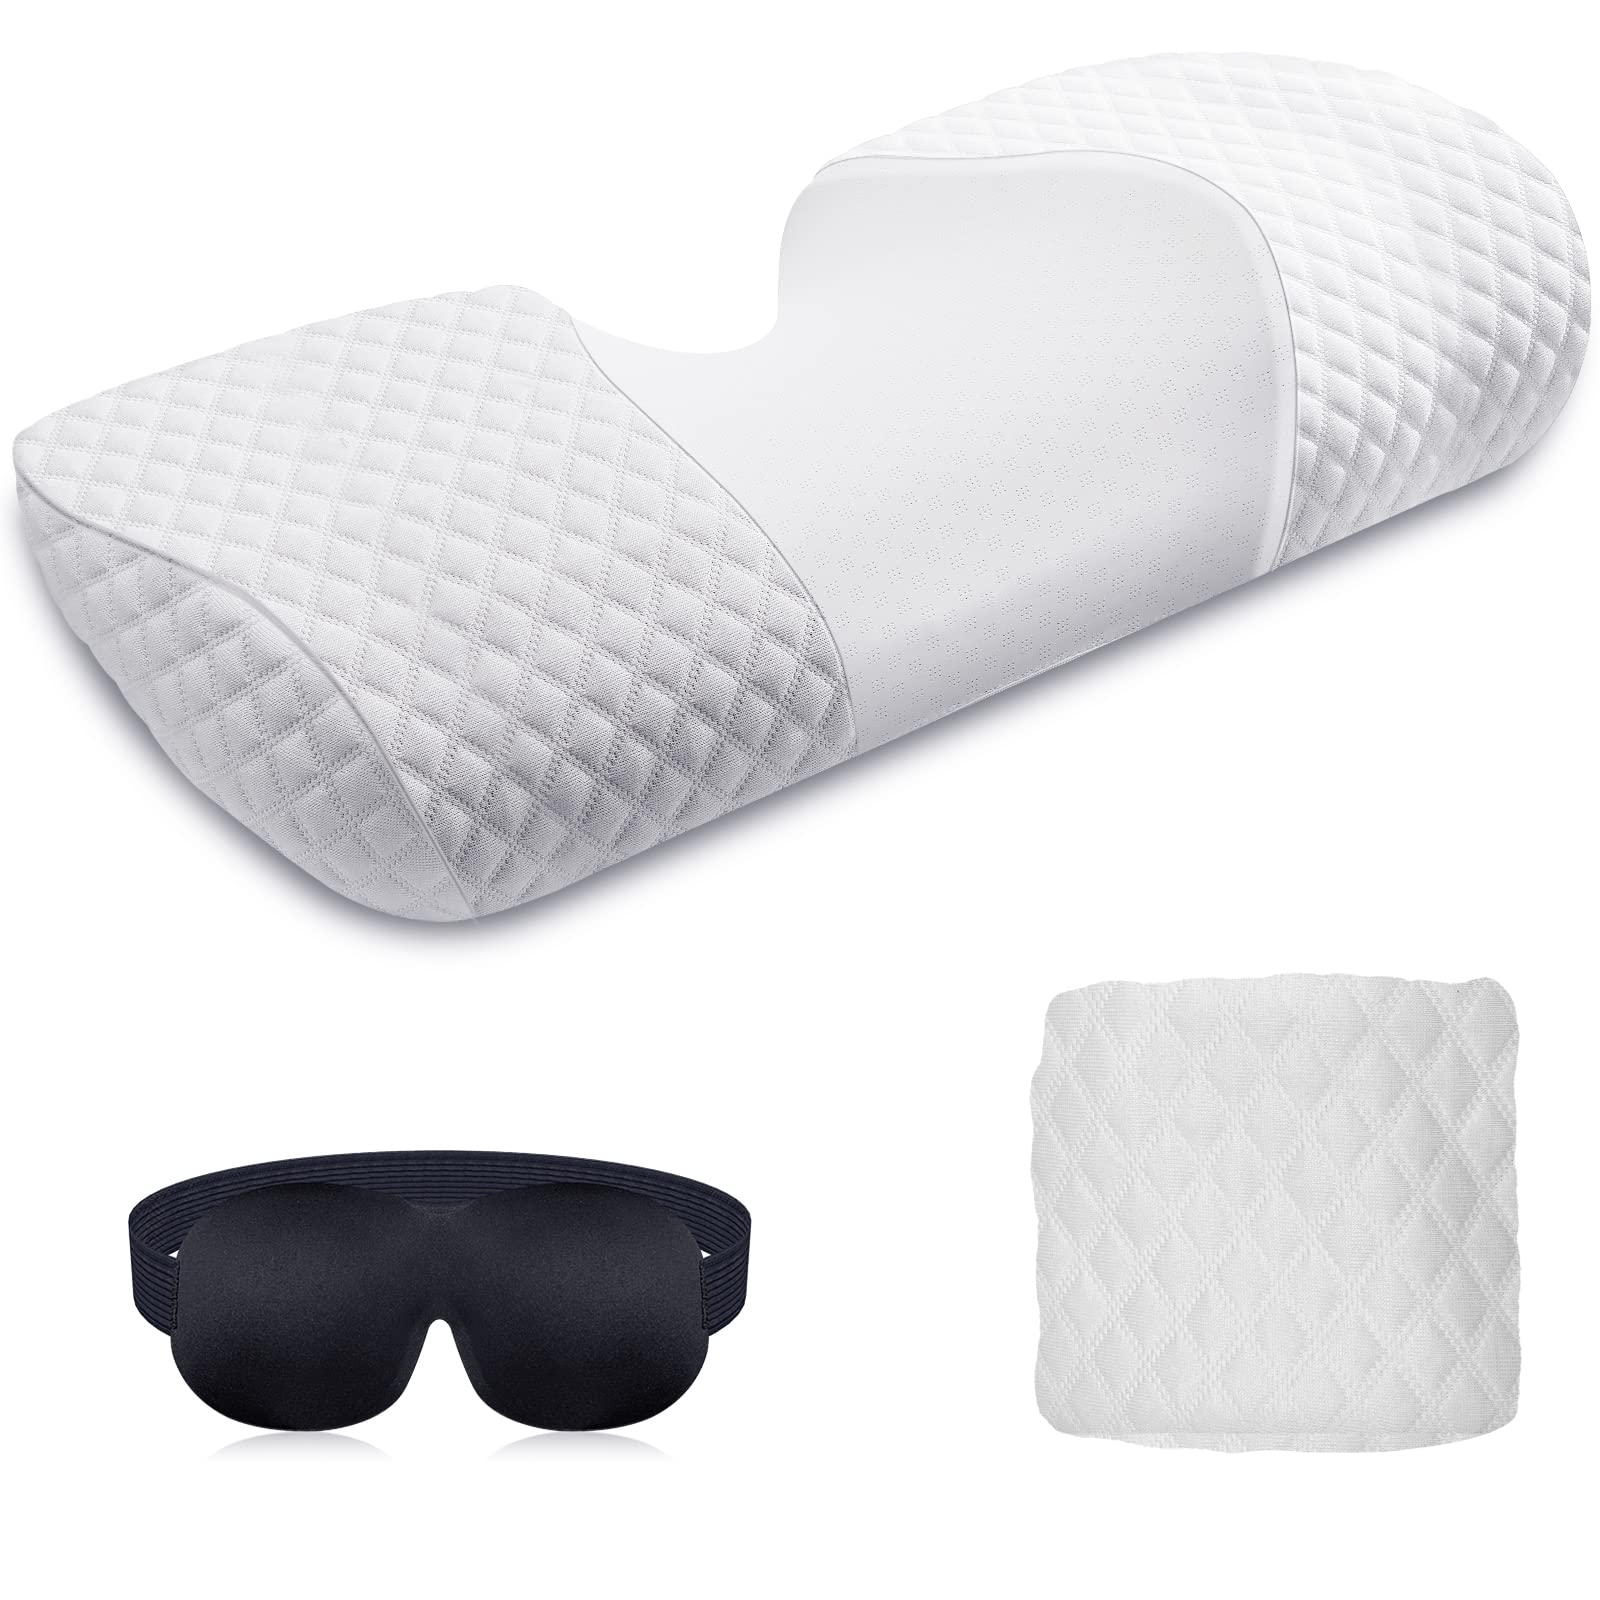 Groove Pillow review: firm support that reduces aches & aligns the spine